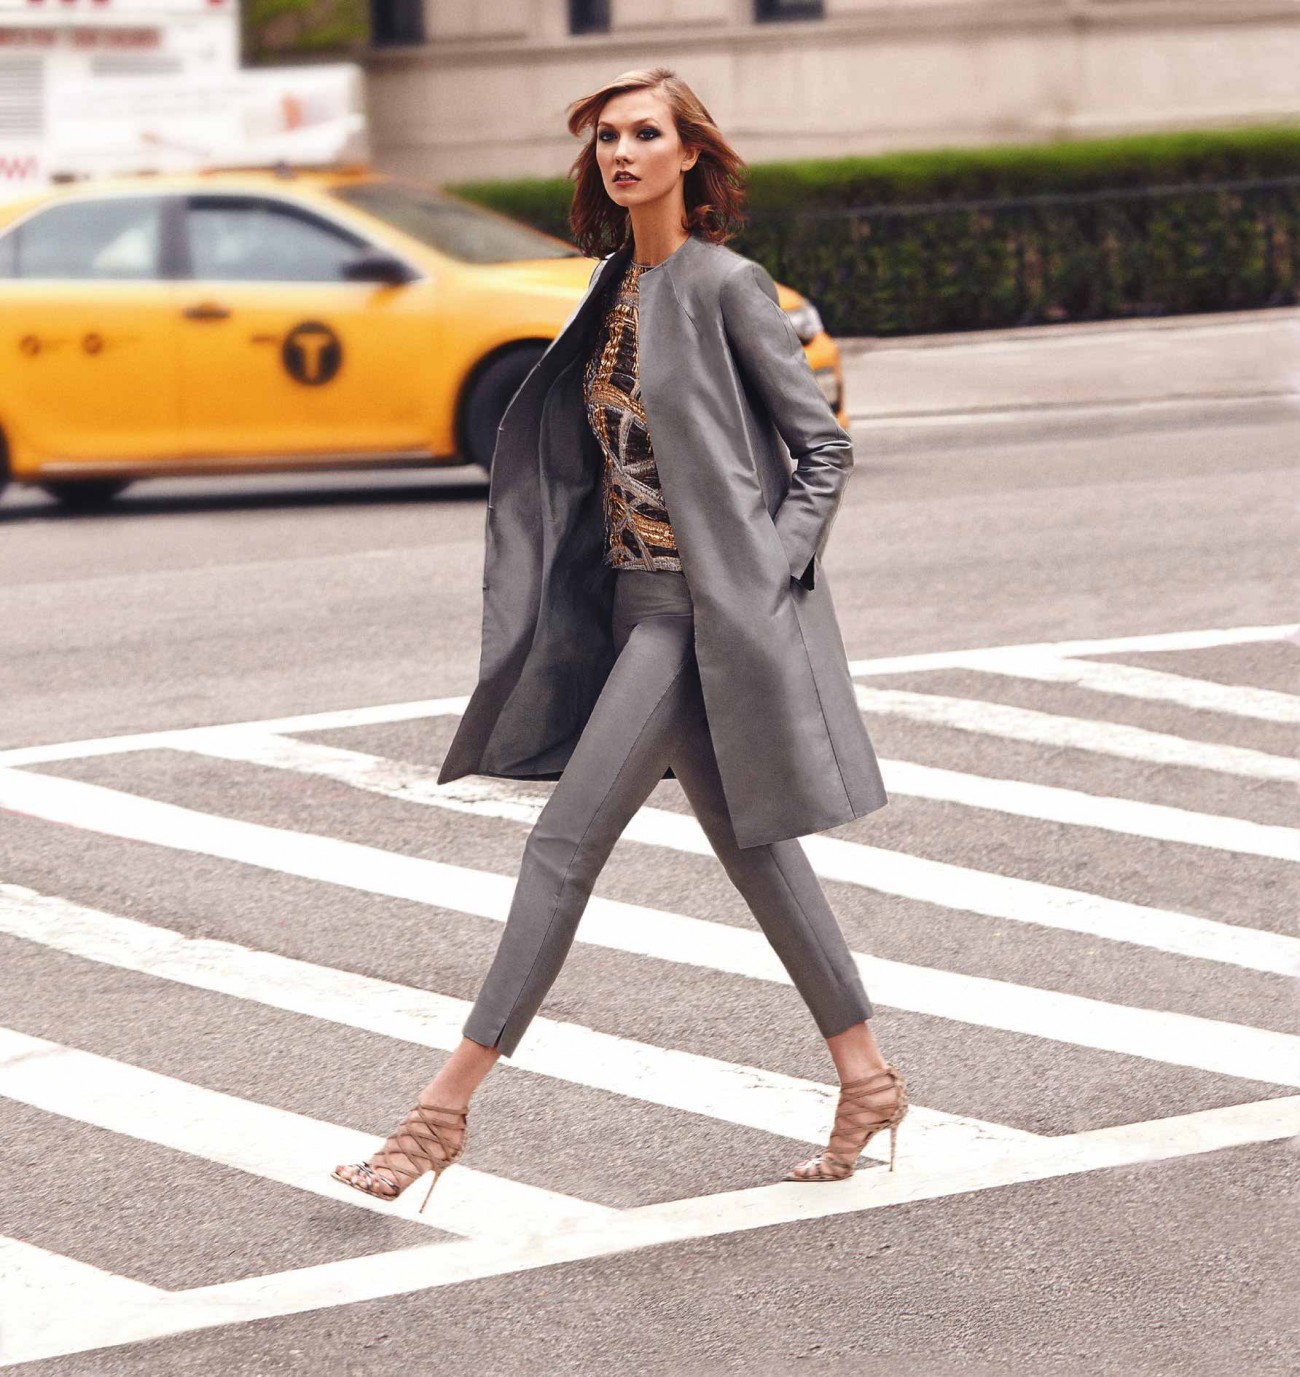 Karlie-Kloss-by-Walter-Chin-for-Neiman-Marcus-the-October-Book-2014_03.jpg